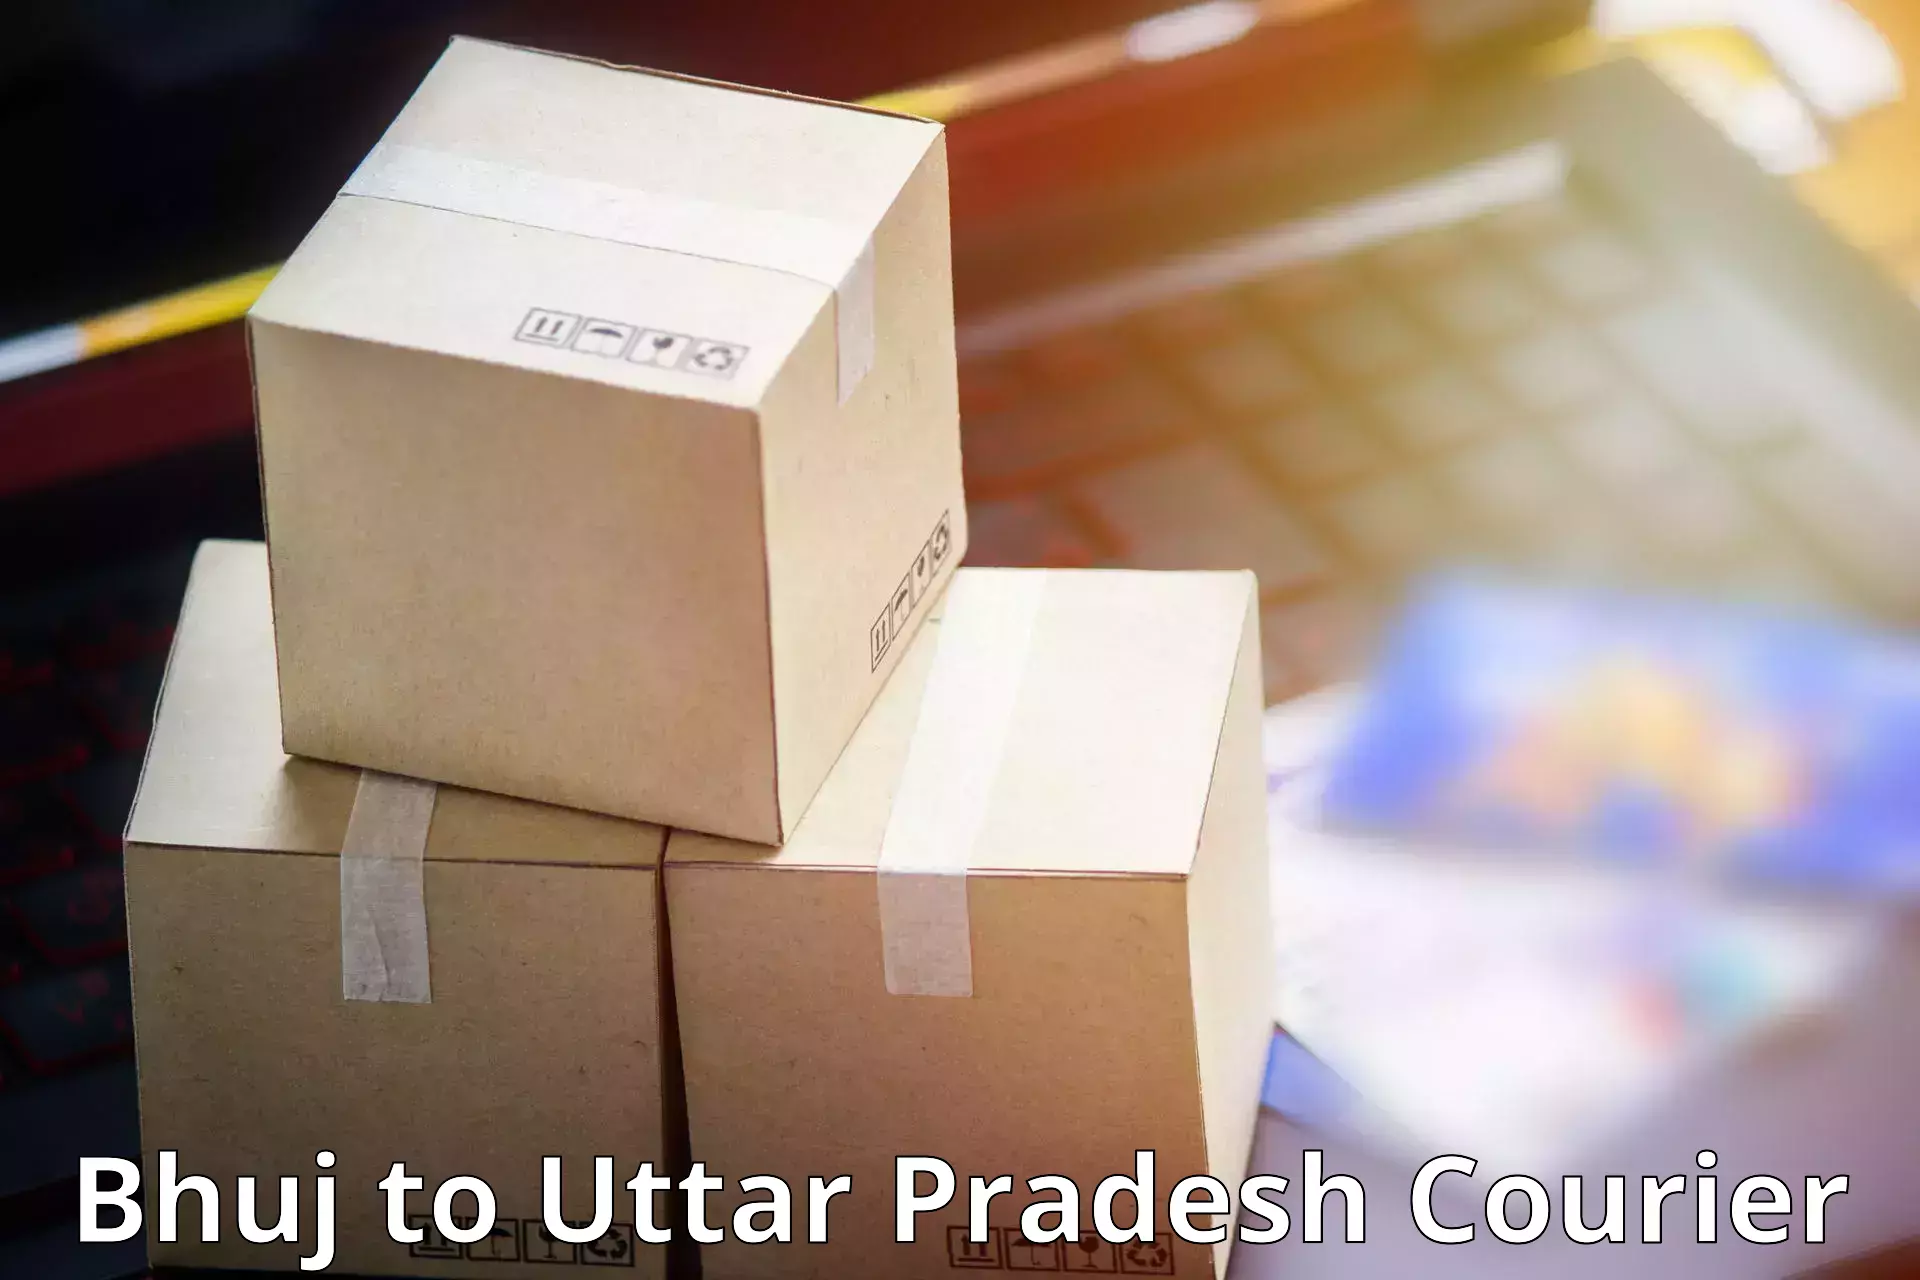 Full-service courier options Bhuj to Agra